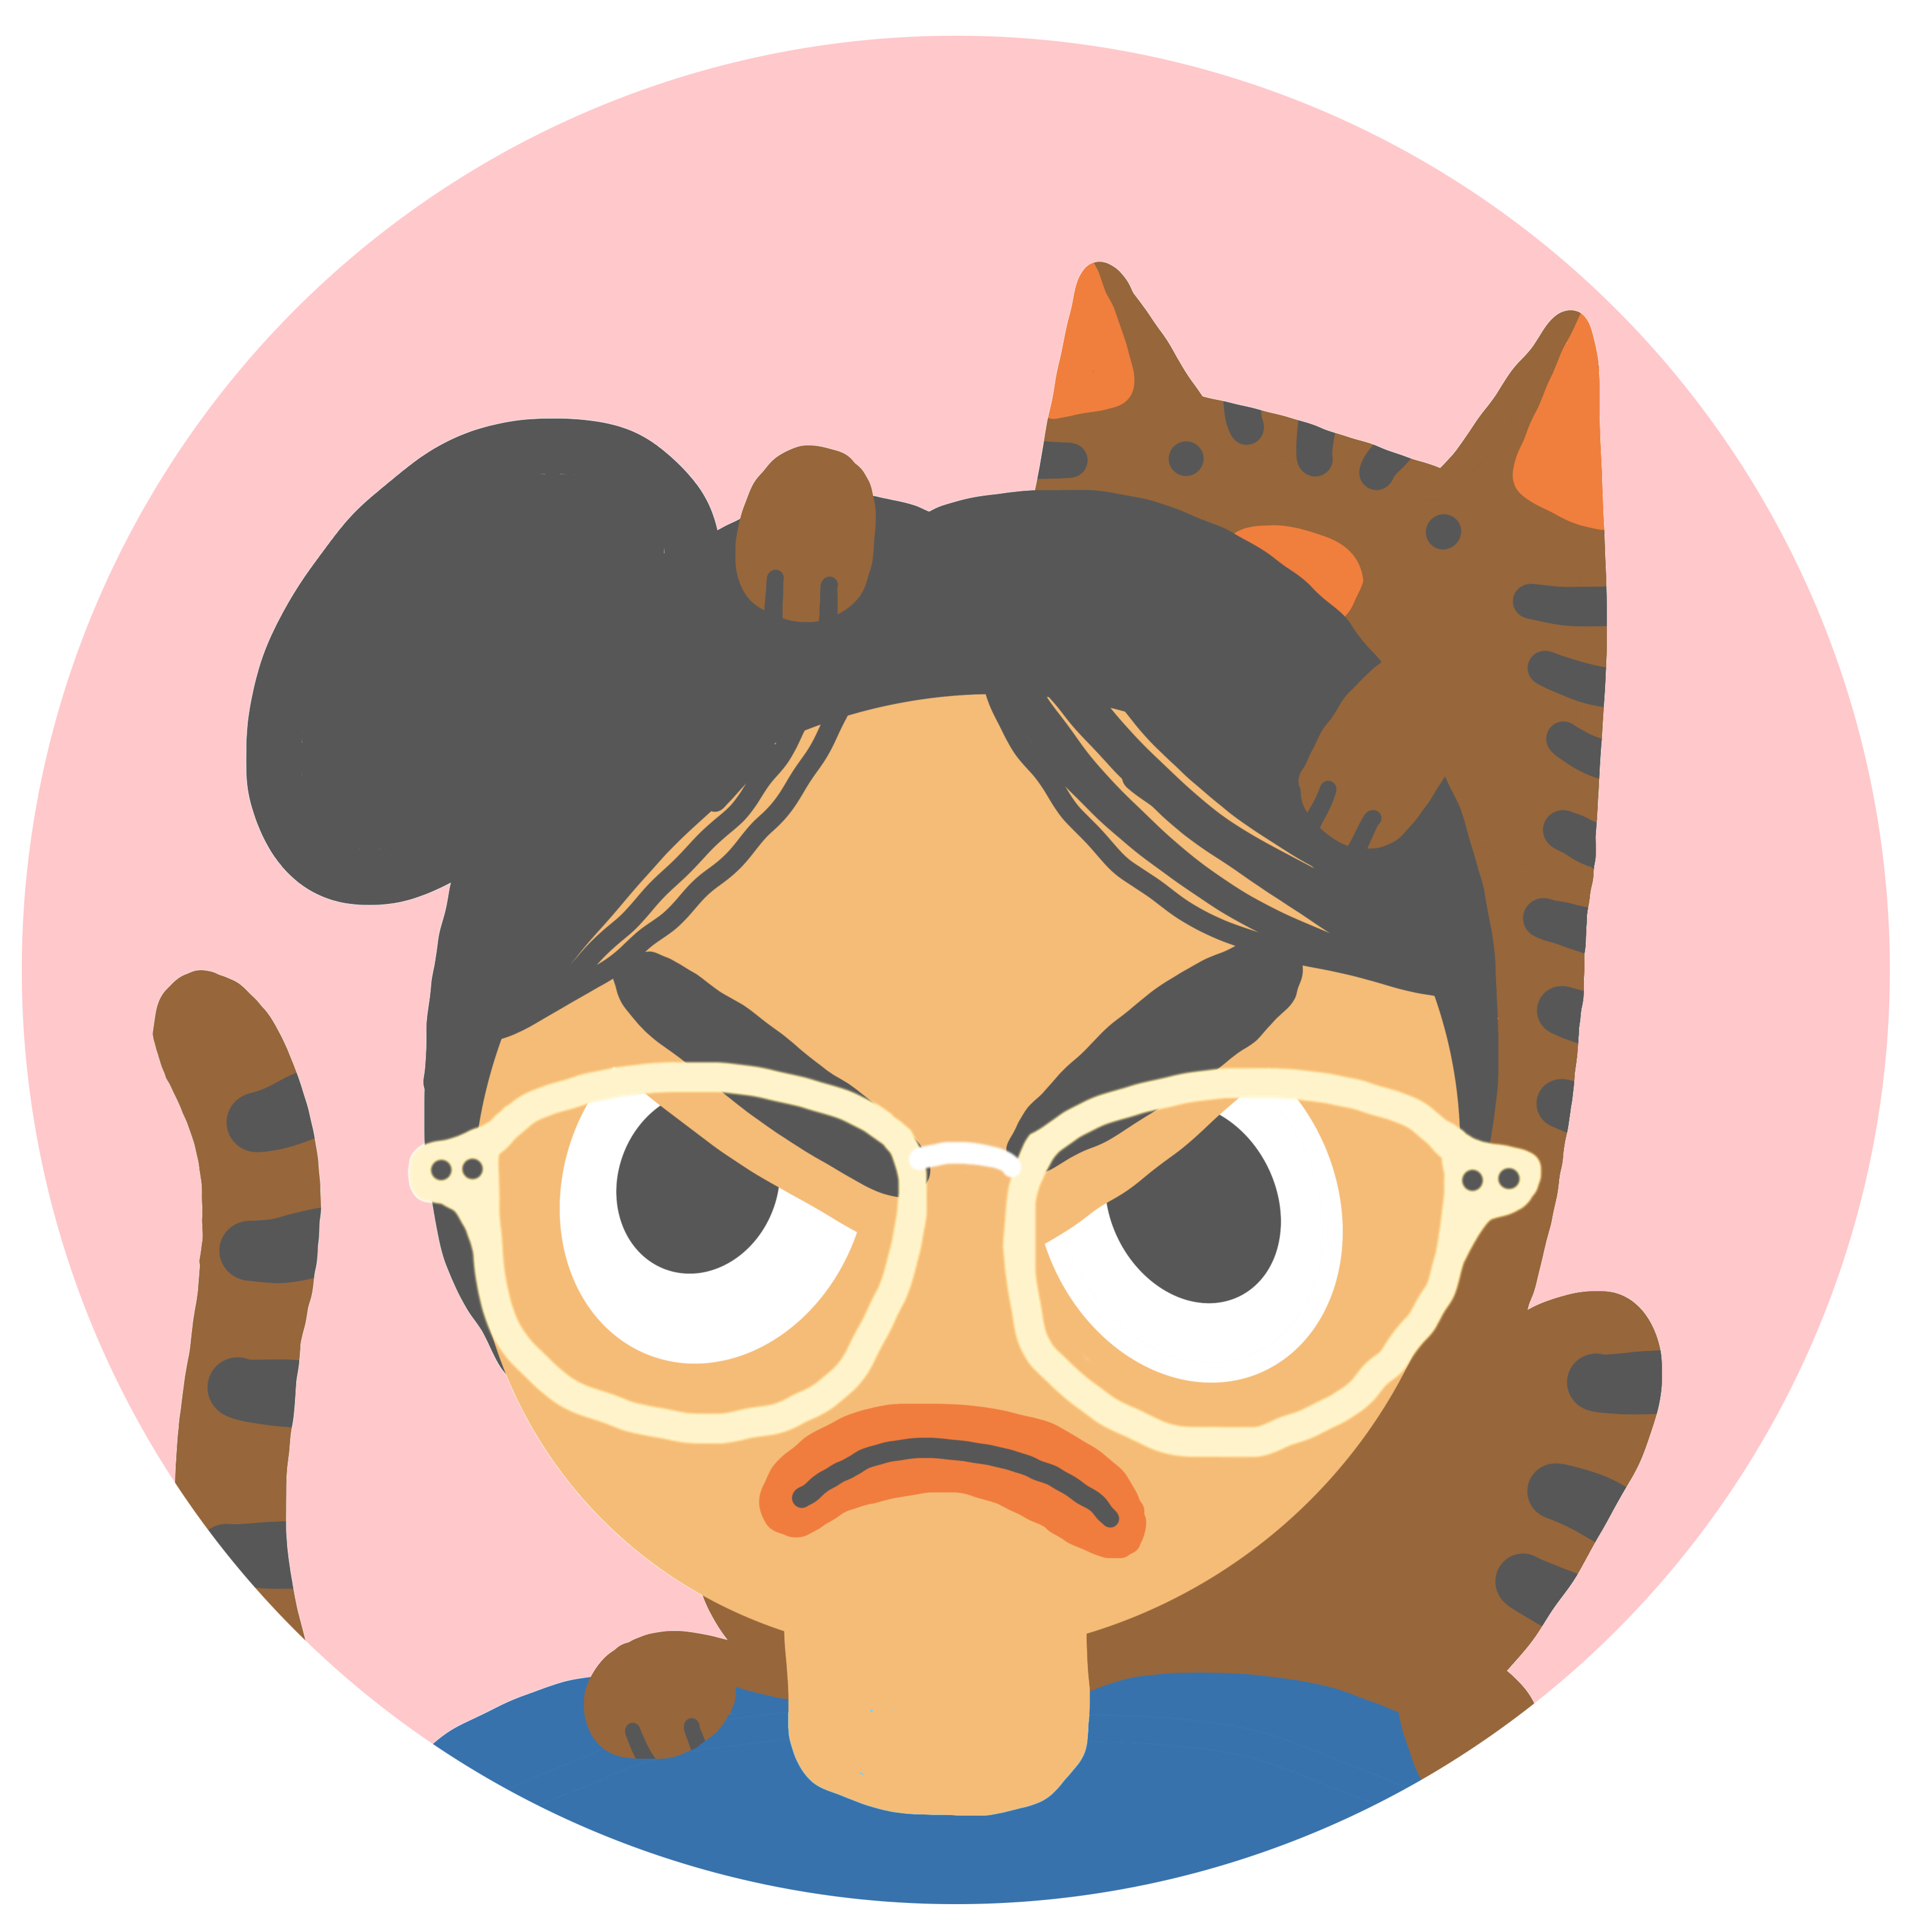 digital illustration of Ropo with black hair in a bun, round glasses, mouth downturned and frowning, with a brown tabby cat sitting on their shoulders